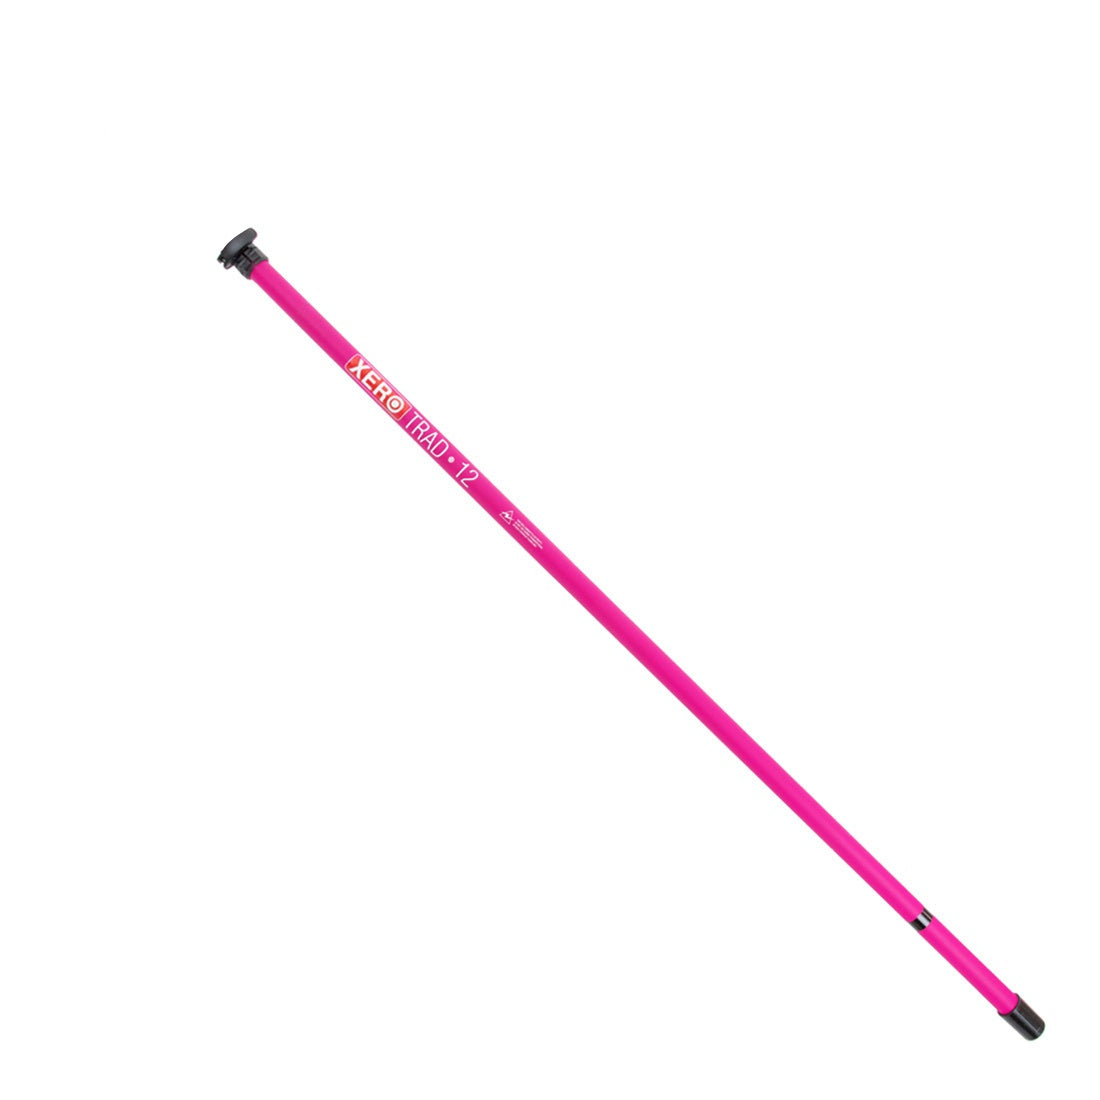 XERO Carbon Fiber Trad Pole 2.0 Replacement Sections Pink View